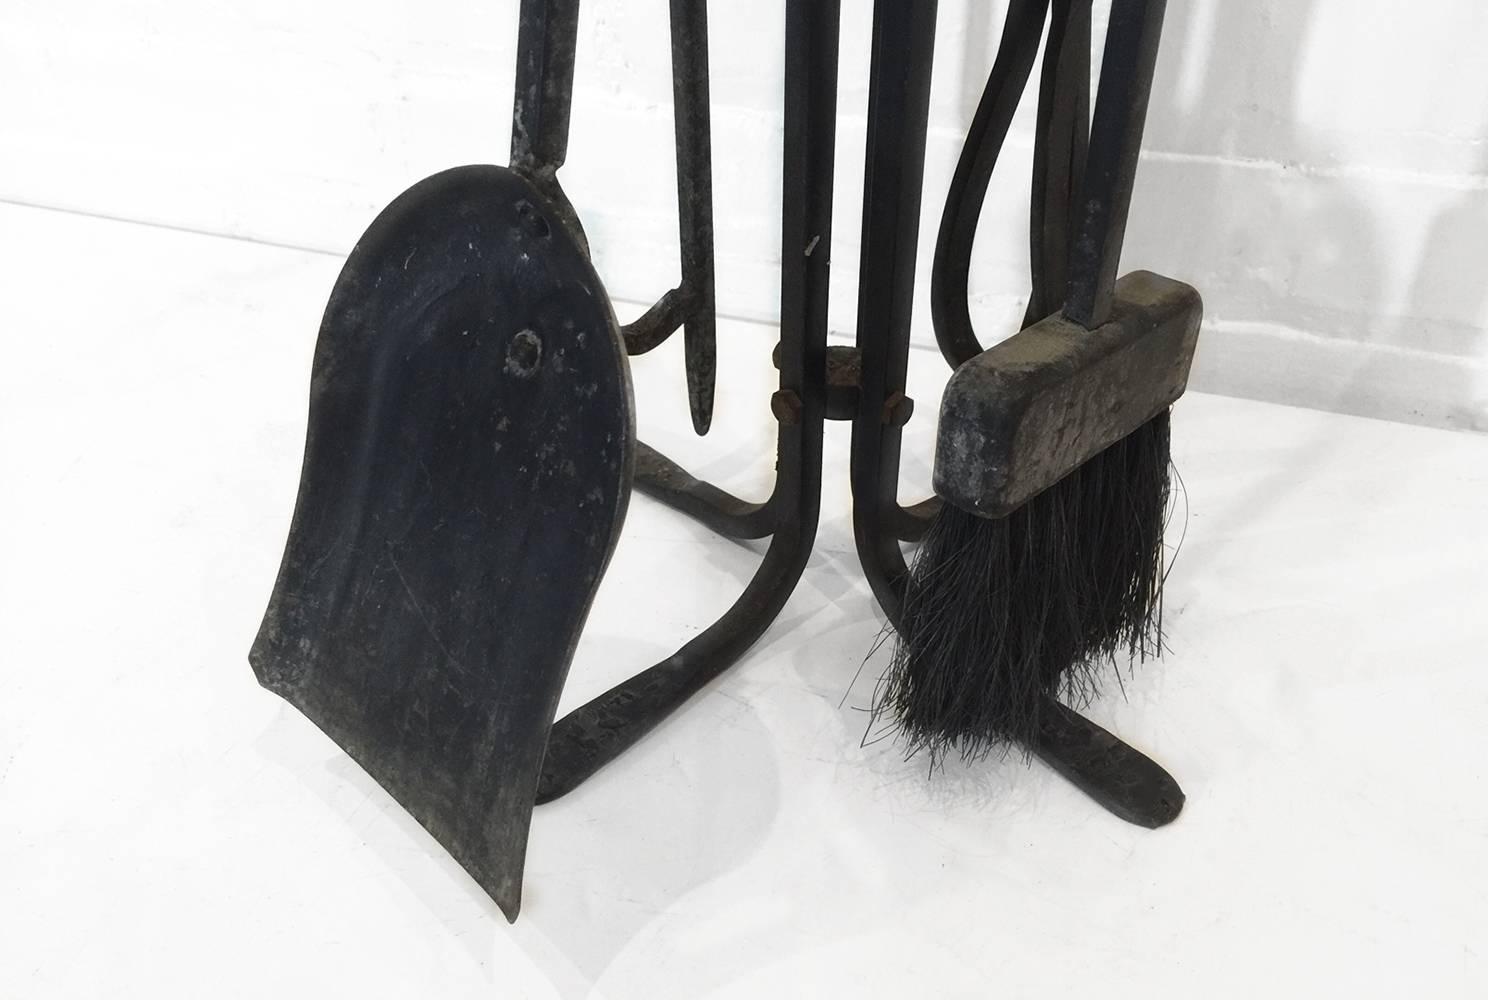 Hand-forged Mid-Century fireplace set includes brush, poker, shovel and tongs. 

Dimensions: 27.5